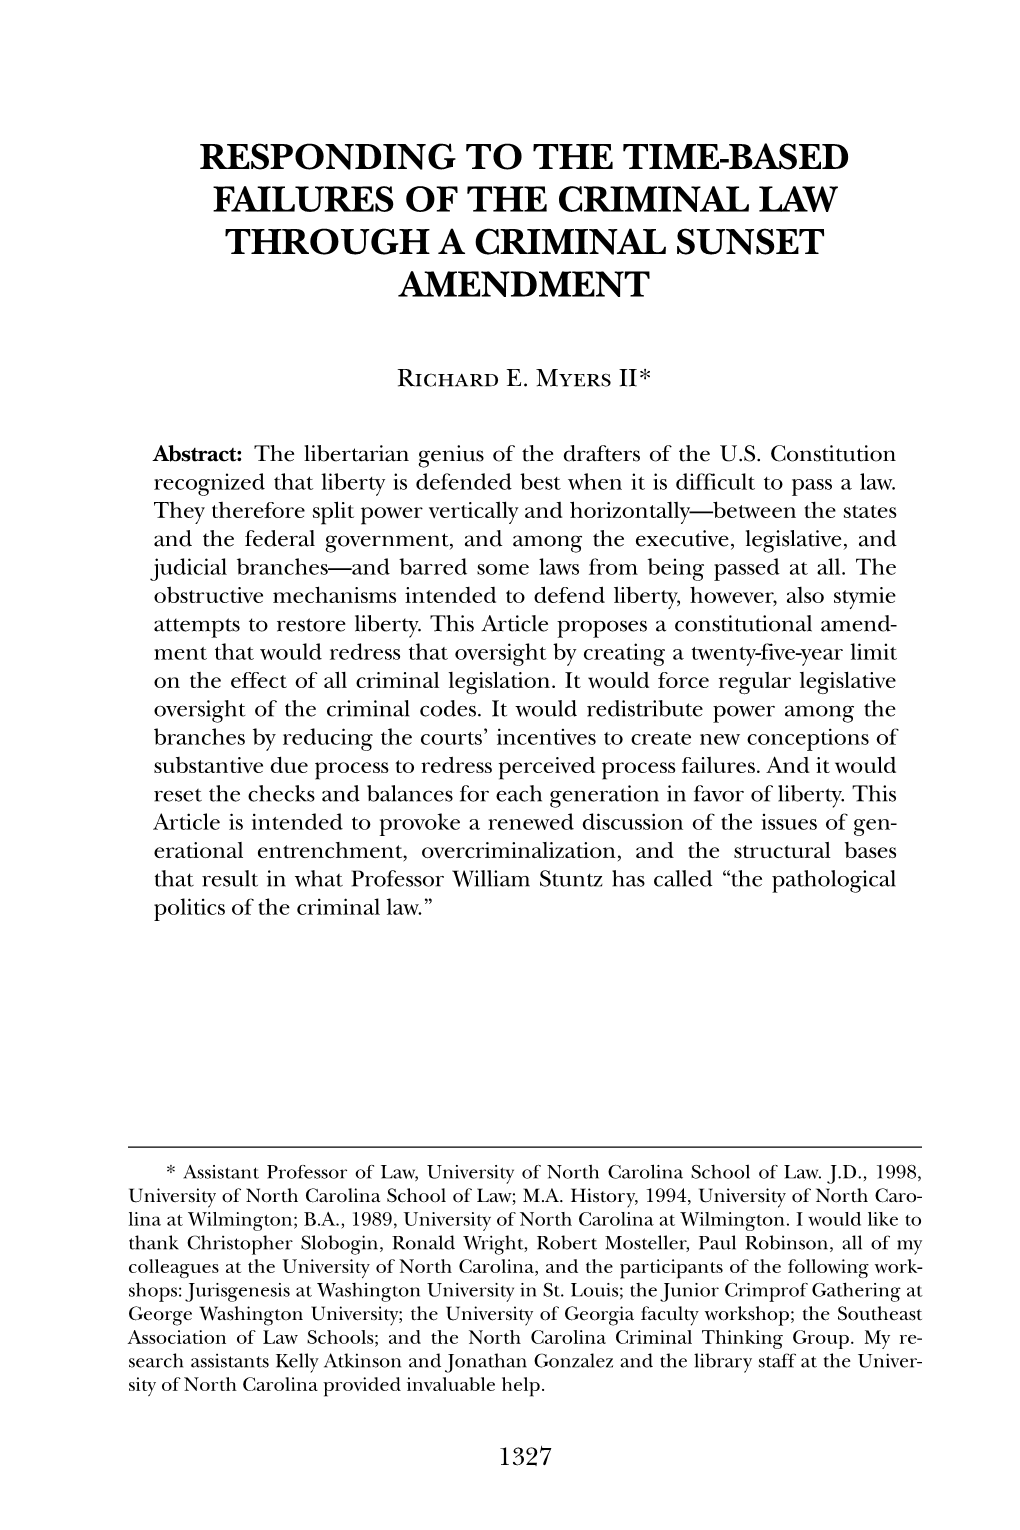 Responding to the Time-Based Failures of the Criminal Law Through a Criminal Sunset Amendment